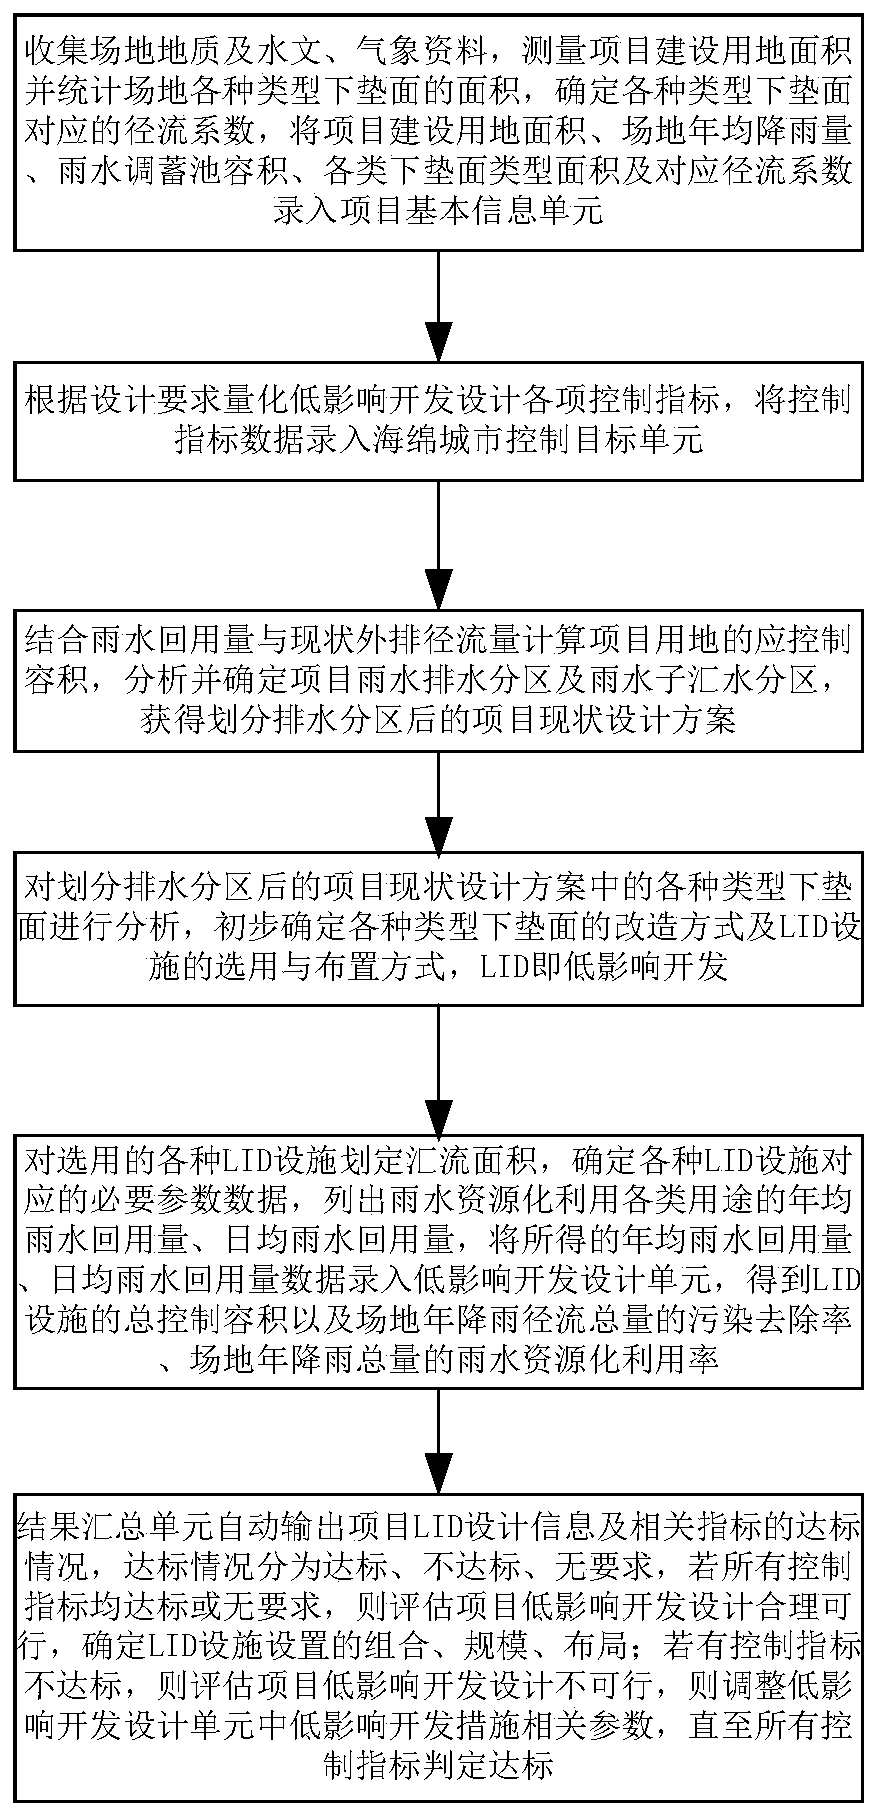 Low-impact development design and evaluation method and system